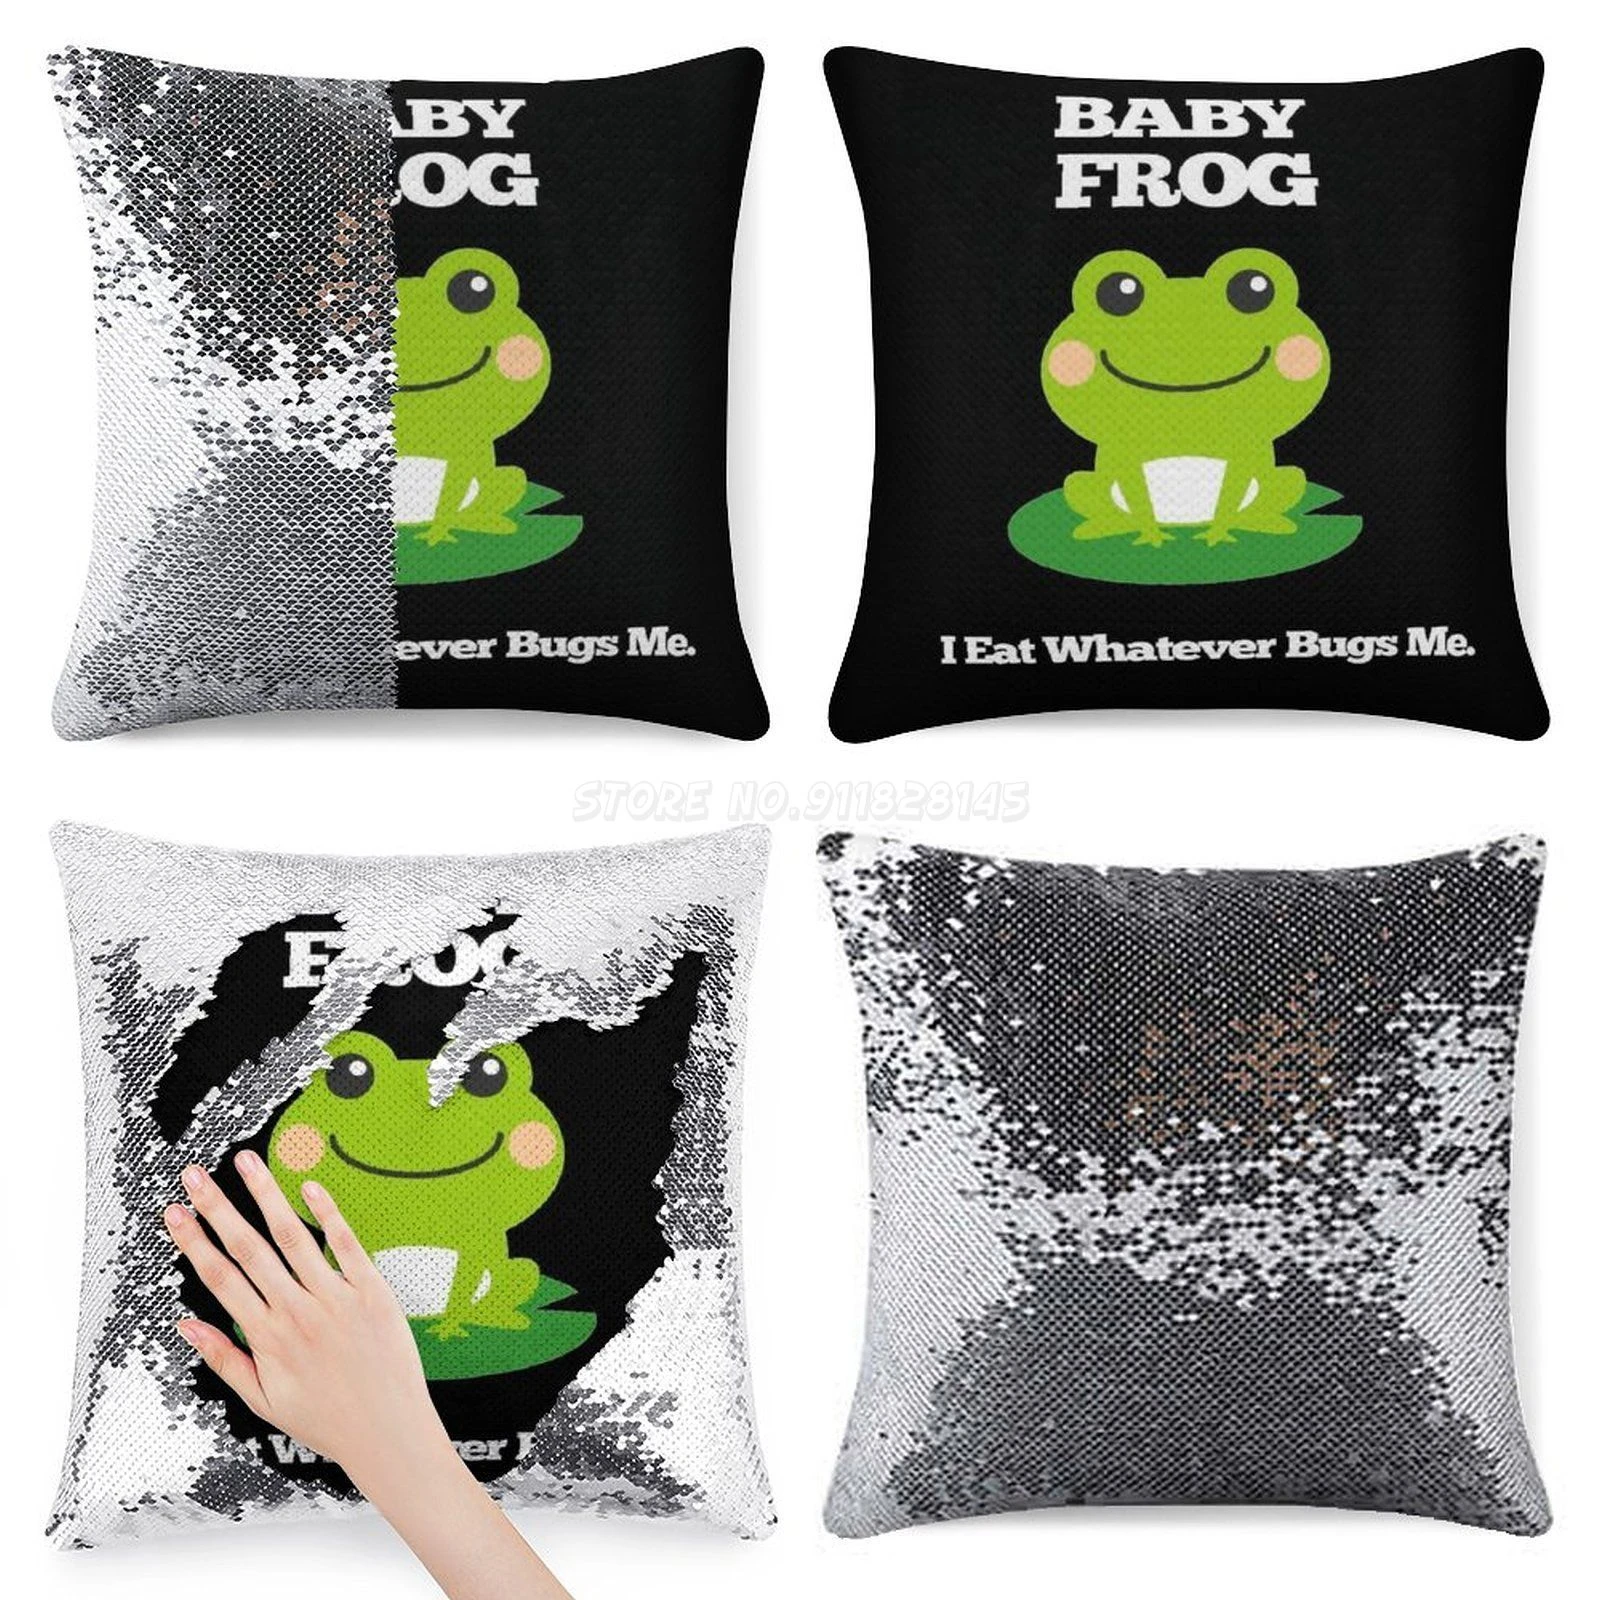 BABY FROG. I EAT Whatever Bugs Me Sequin Pillowcase Glitter Pillow Case for  Sofa Decorative Party Funny Frog Baby Cartoon Cute F|Pillow Case| -  AliExpress